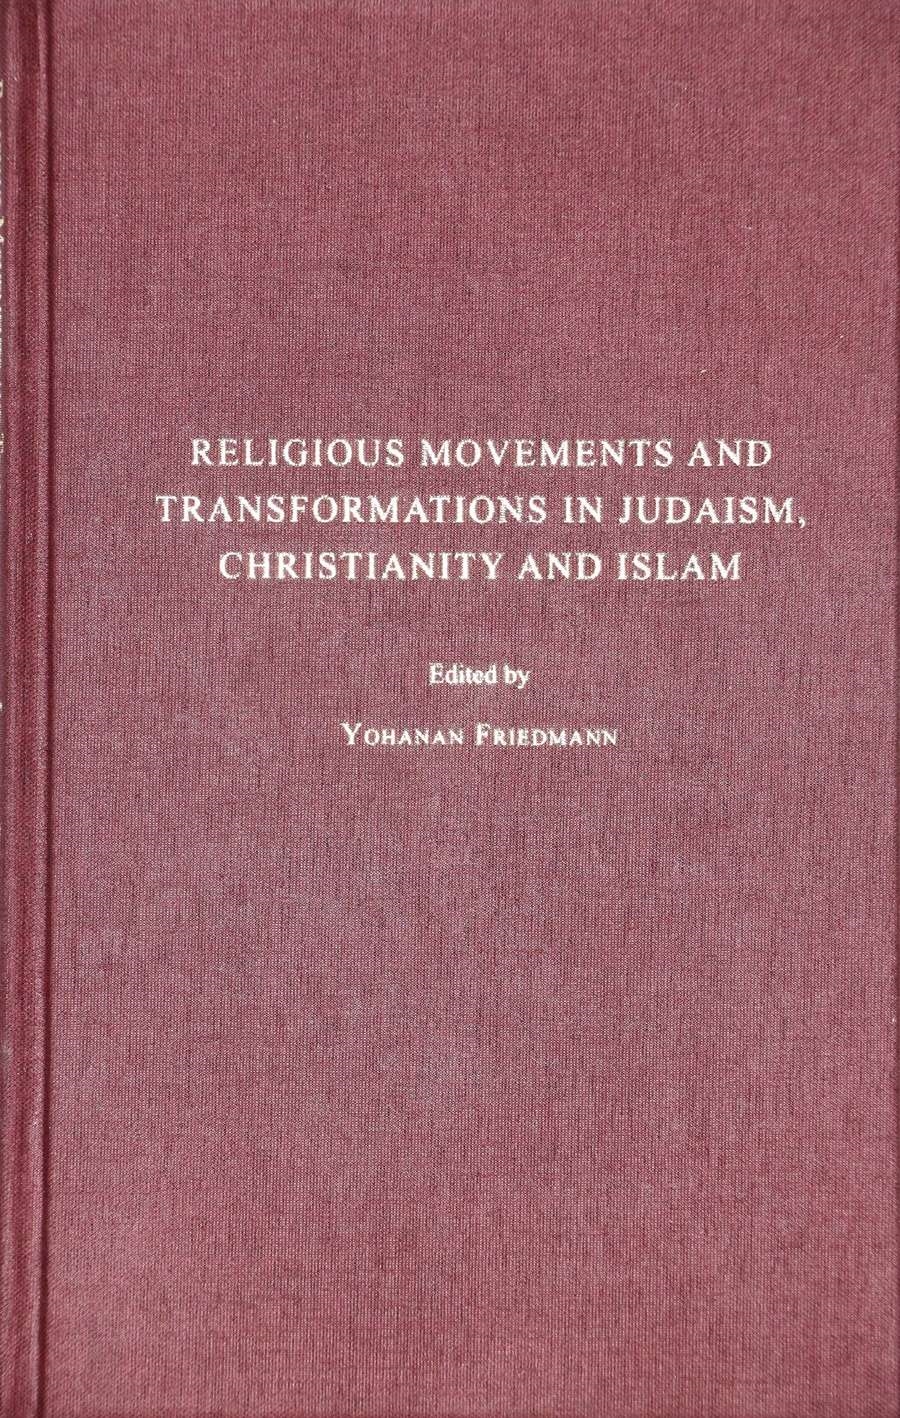 Religious Movements and Transformations in Judaism, Christianity and Islam